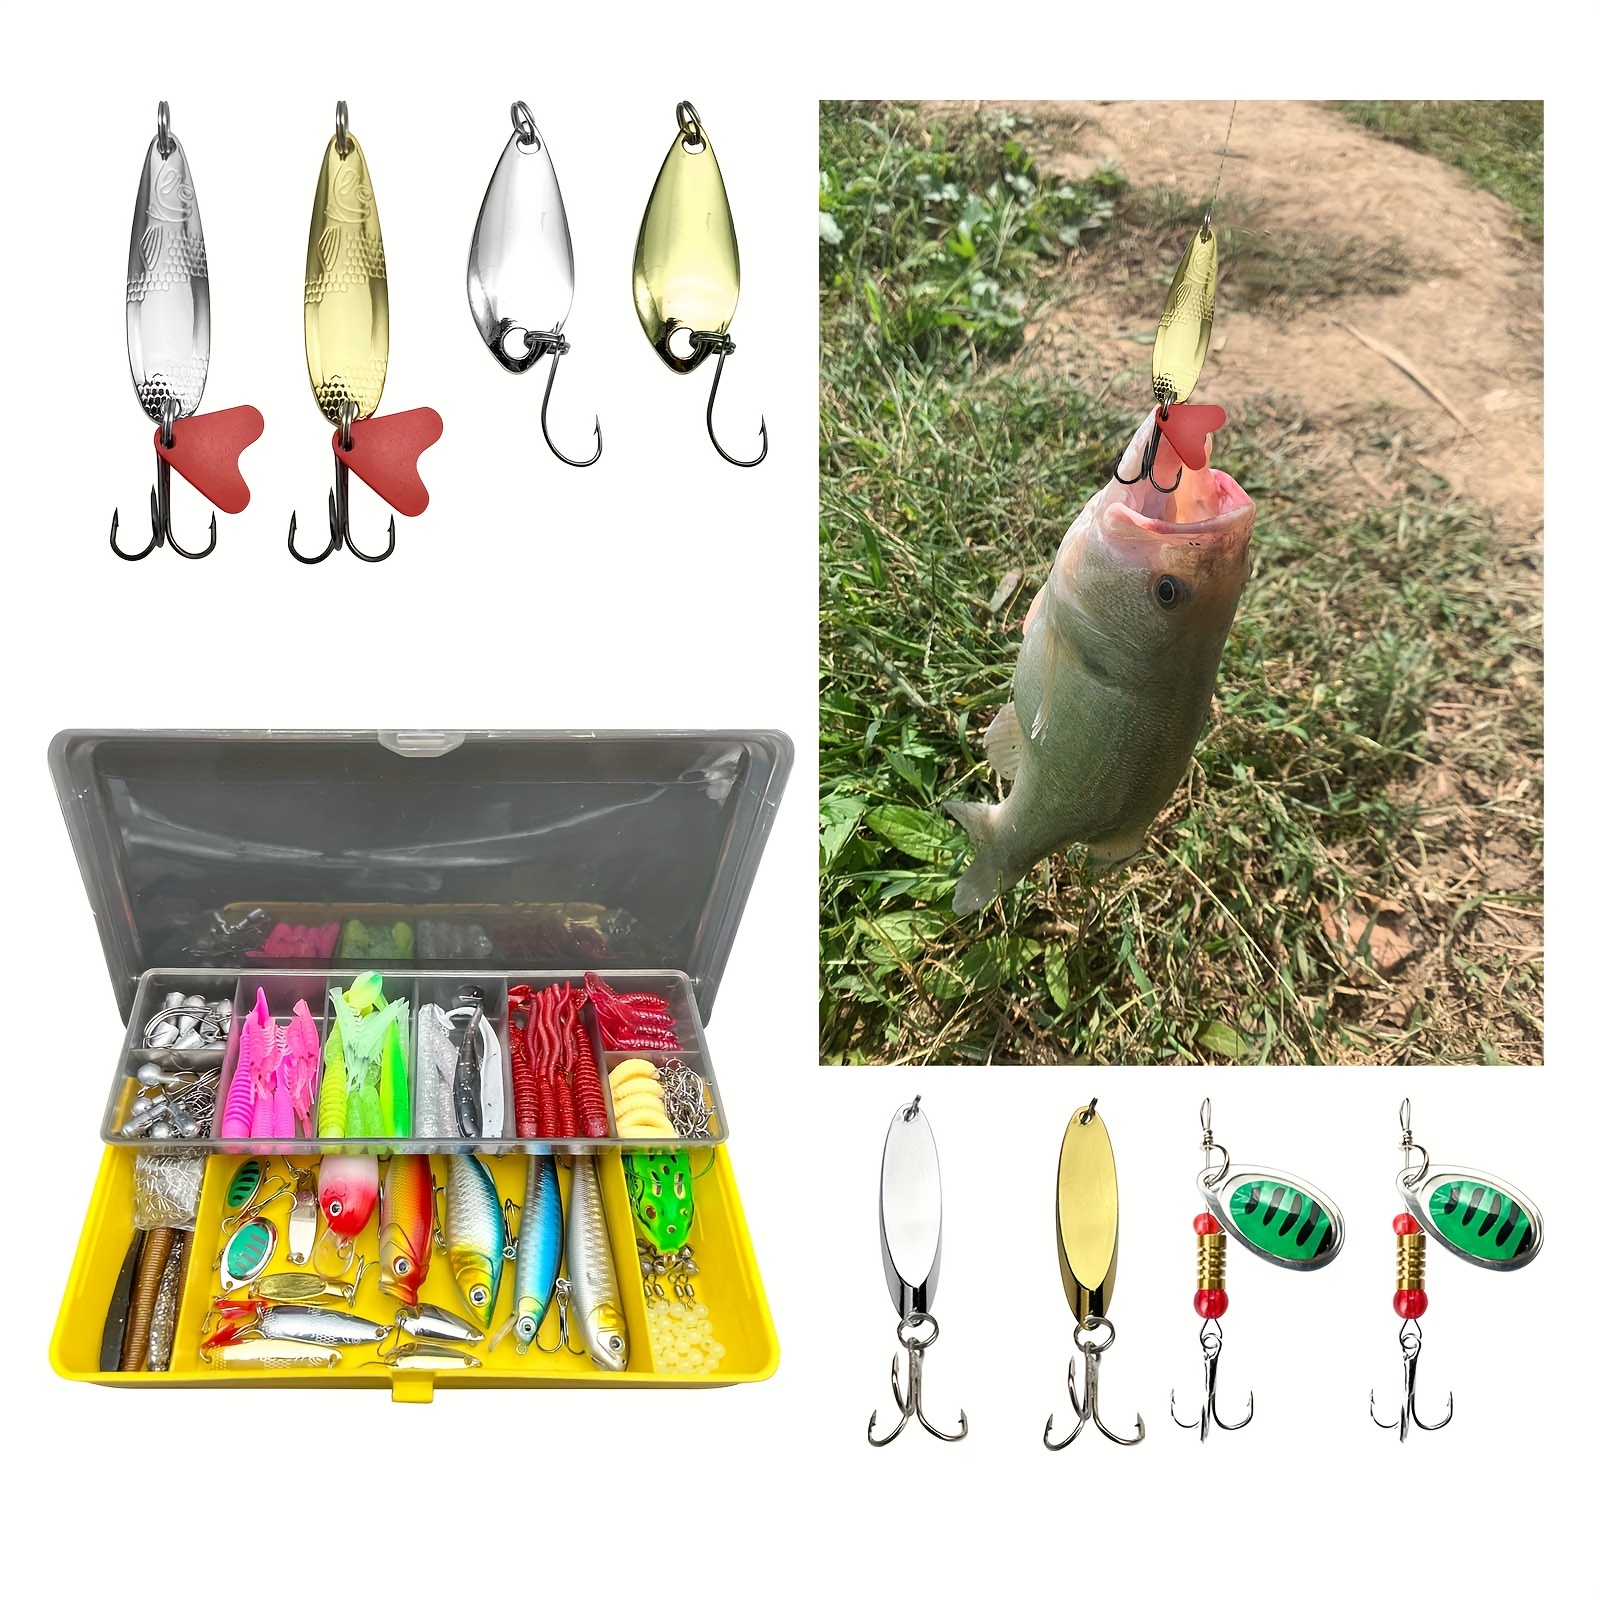 TOPIND Fishing Live Bait Storage Durable Multifunction Fishing Box Live  Baits Bucket Fish Lures Spoons Hooks Reels Storage Bag Tackle Waist Case